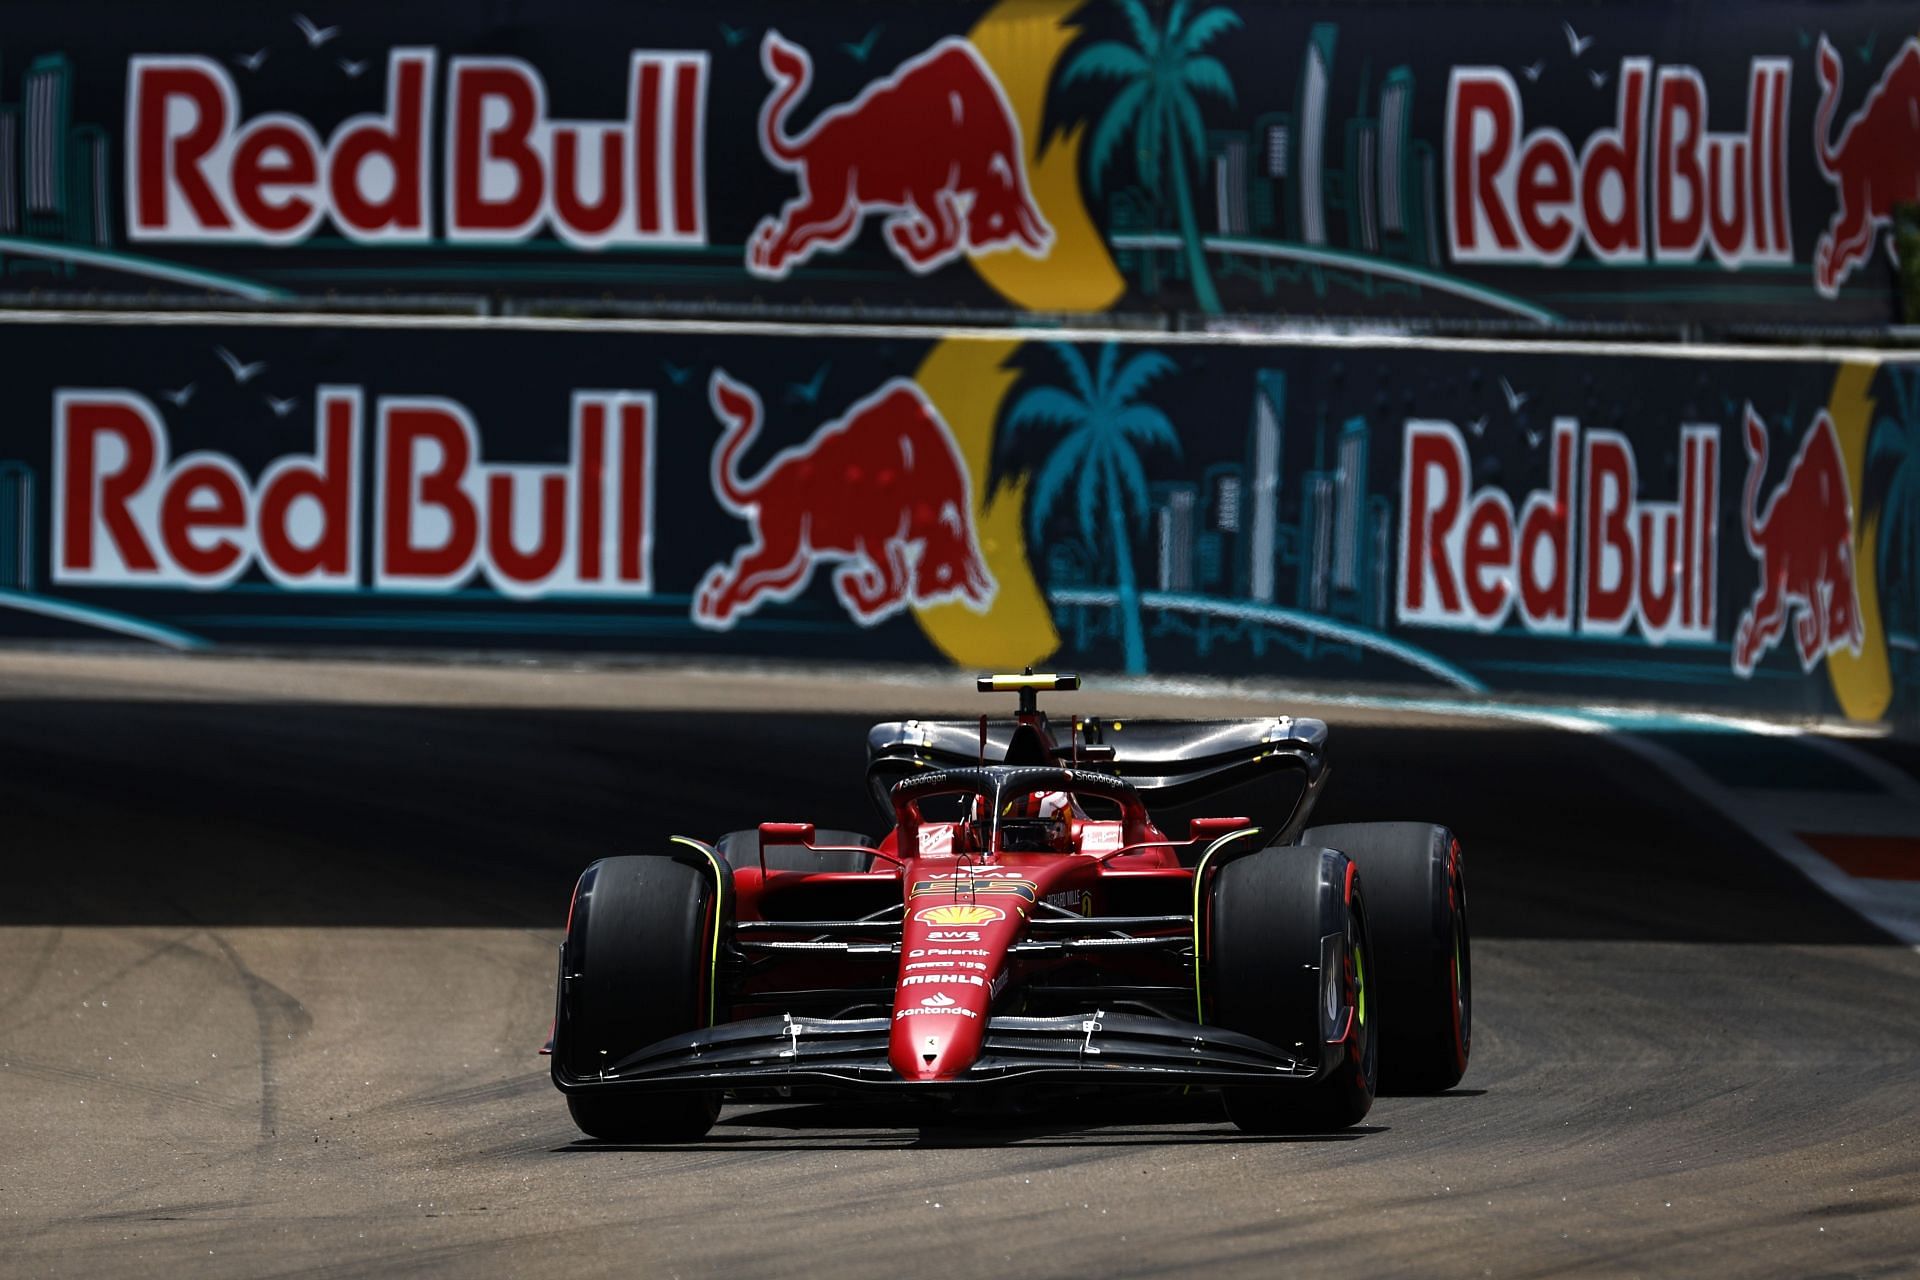 Carlos Sainz in action during the 2022 F1 Miami GP weekend. (Photo by Jared C. Tilton/Getty Images)